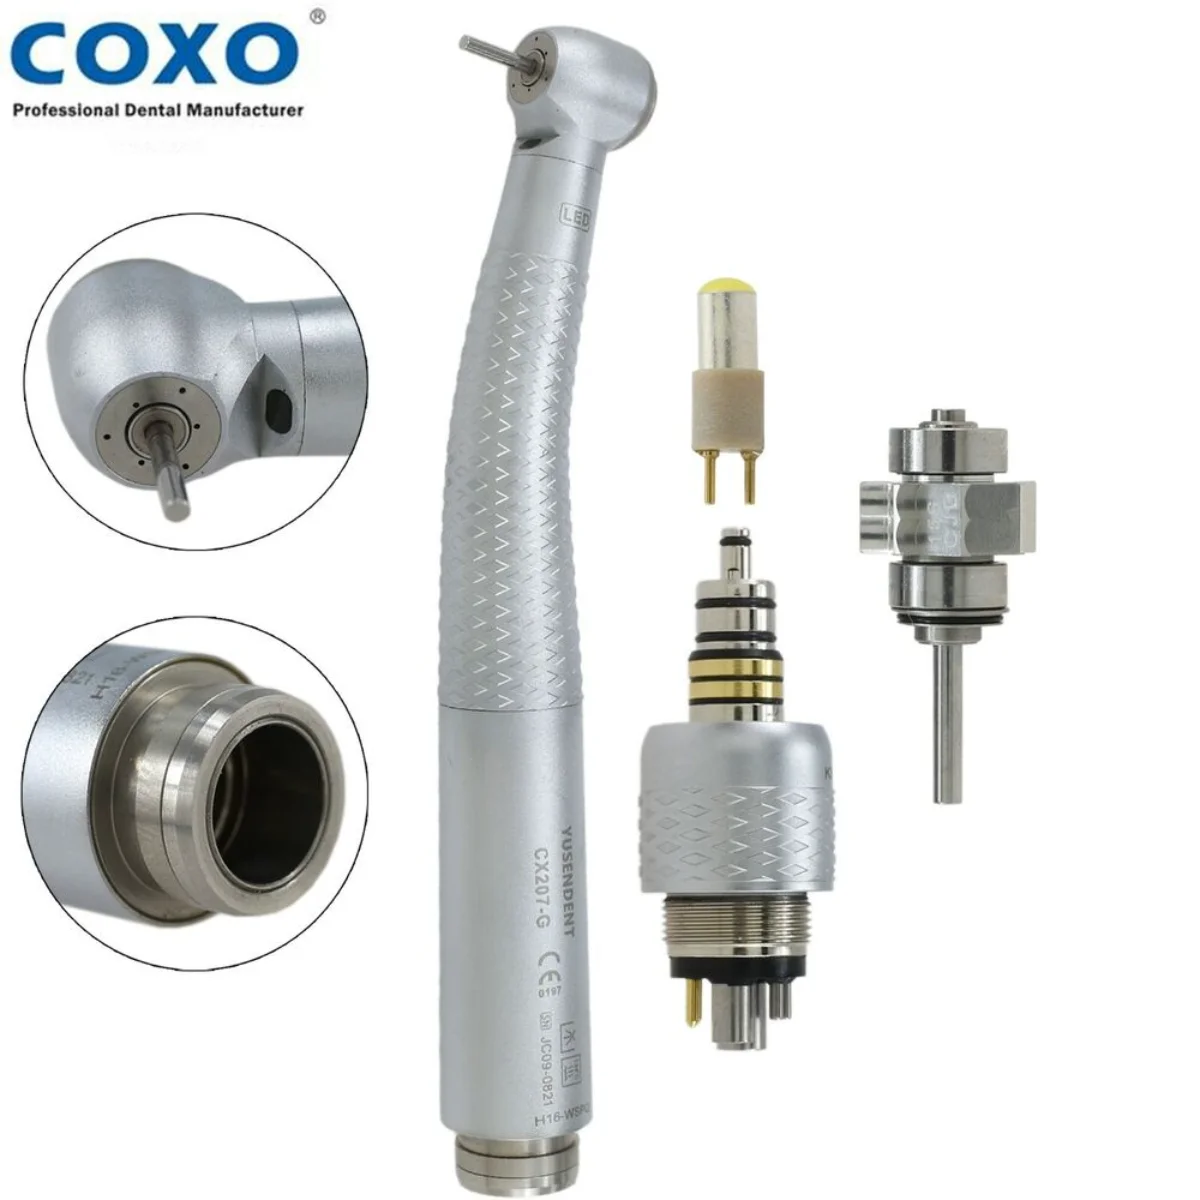 COXO Dental Fiber Optic LED Handpiece High Speed For W/H Roto Coupling 6 Holes